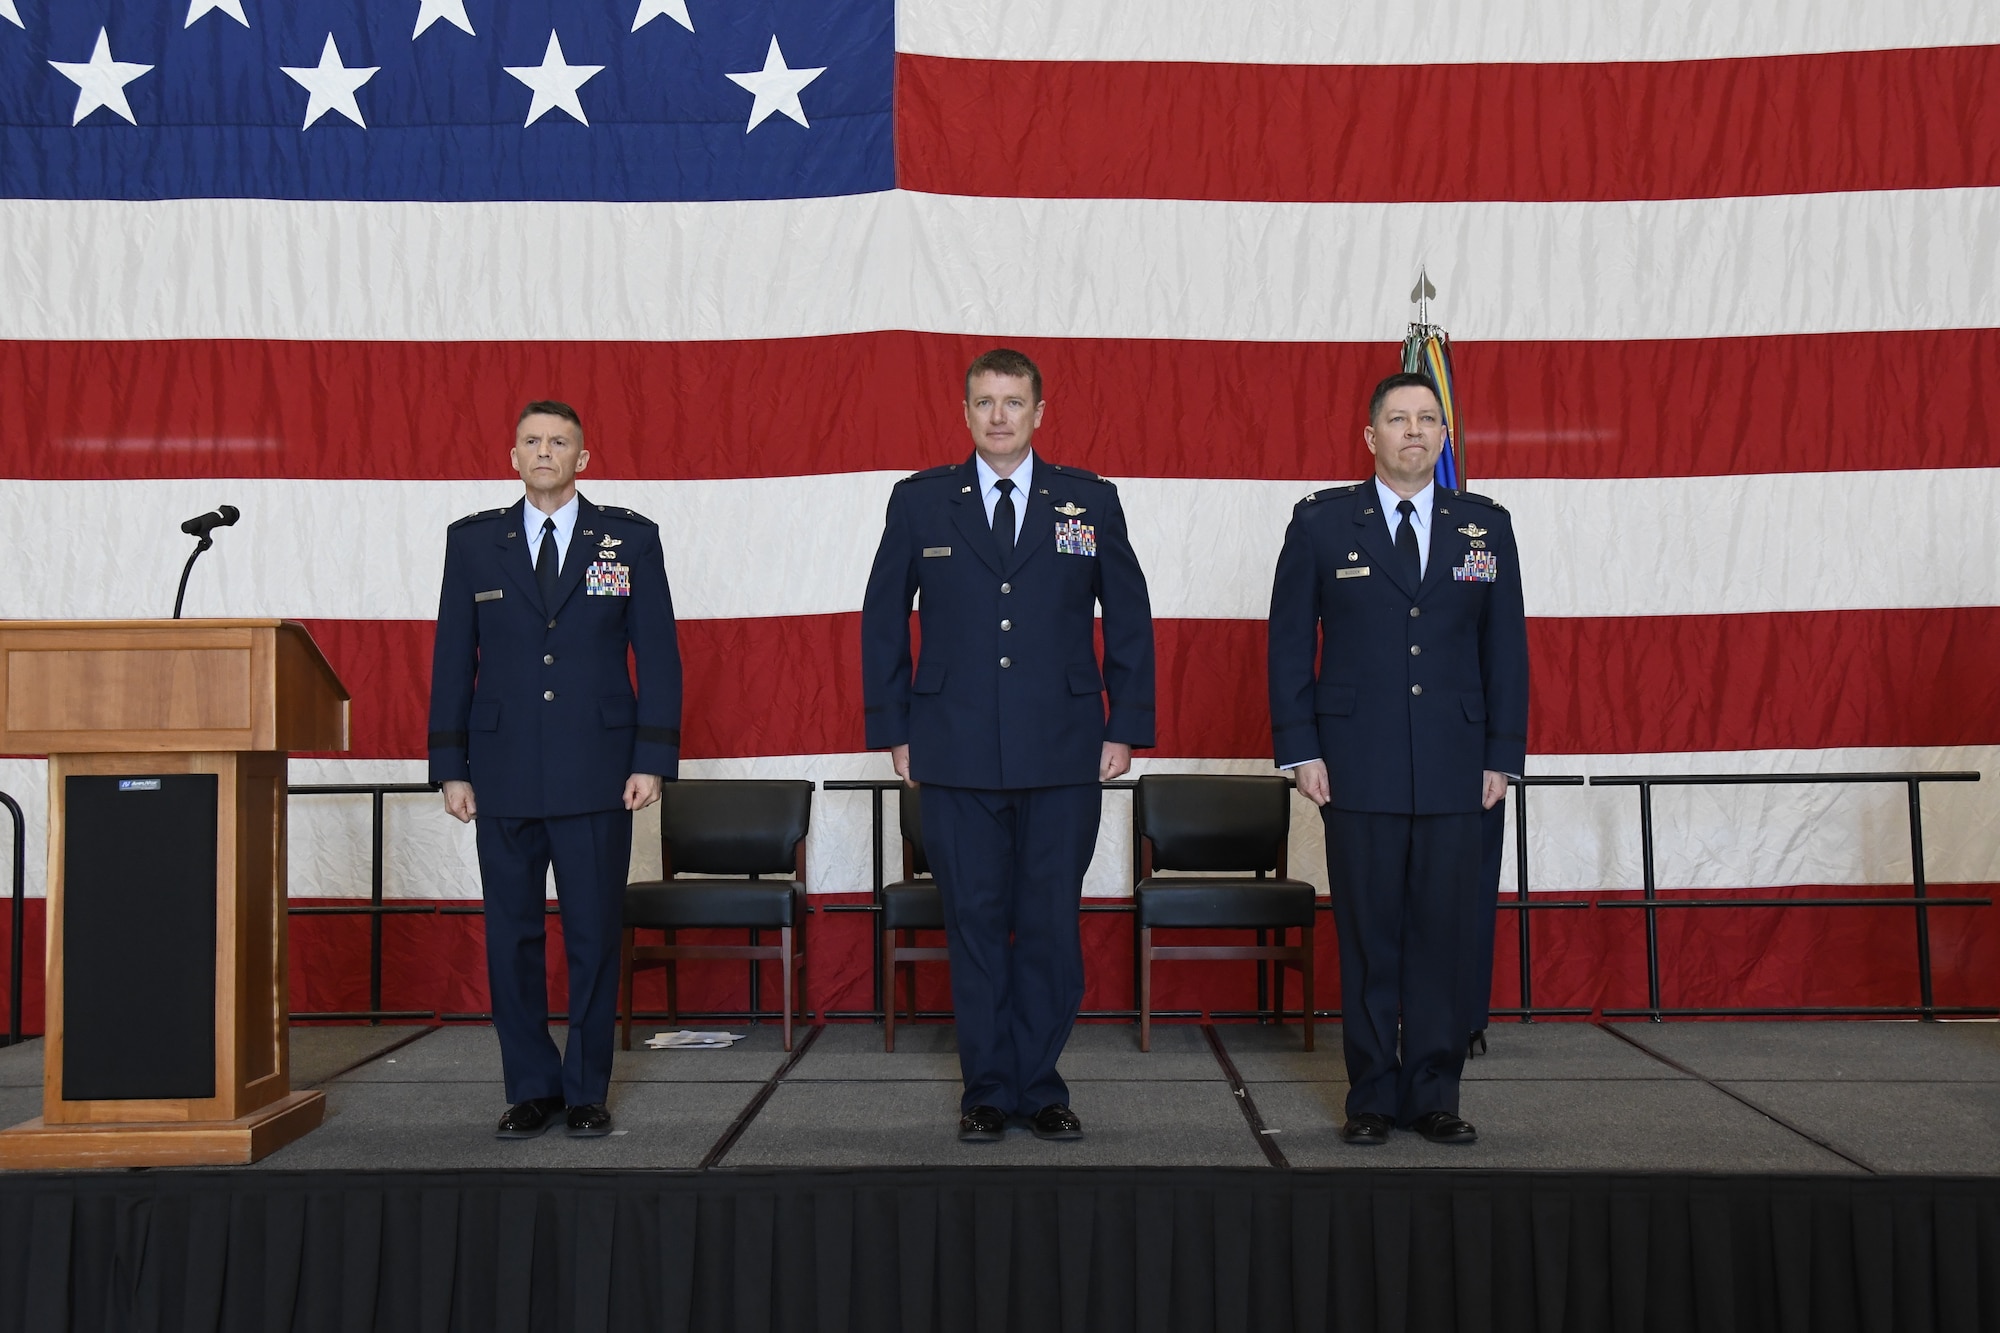 Three service members stand on stage at attention in front of large American flag.